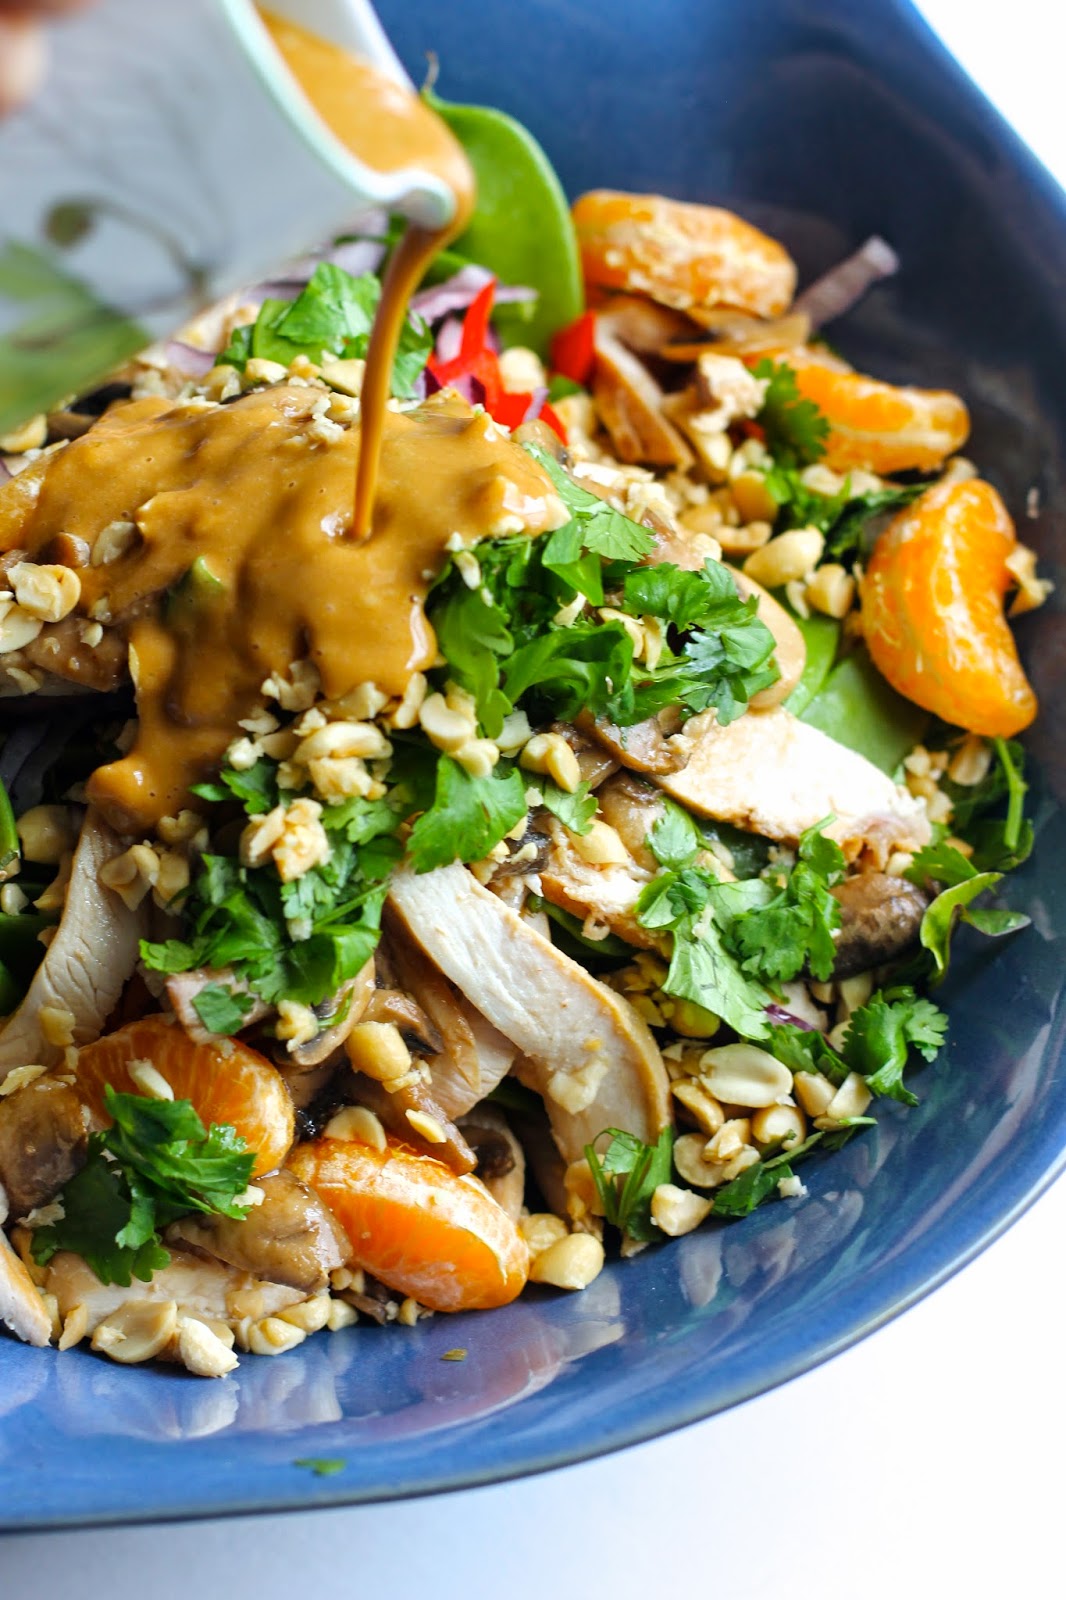 Where Your Treasure Is: Asian Chicken Salad with Peanut Dressing